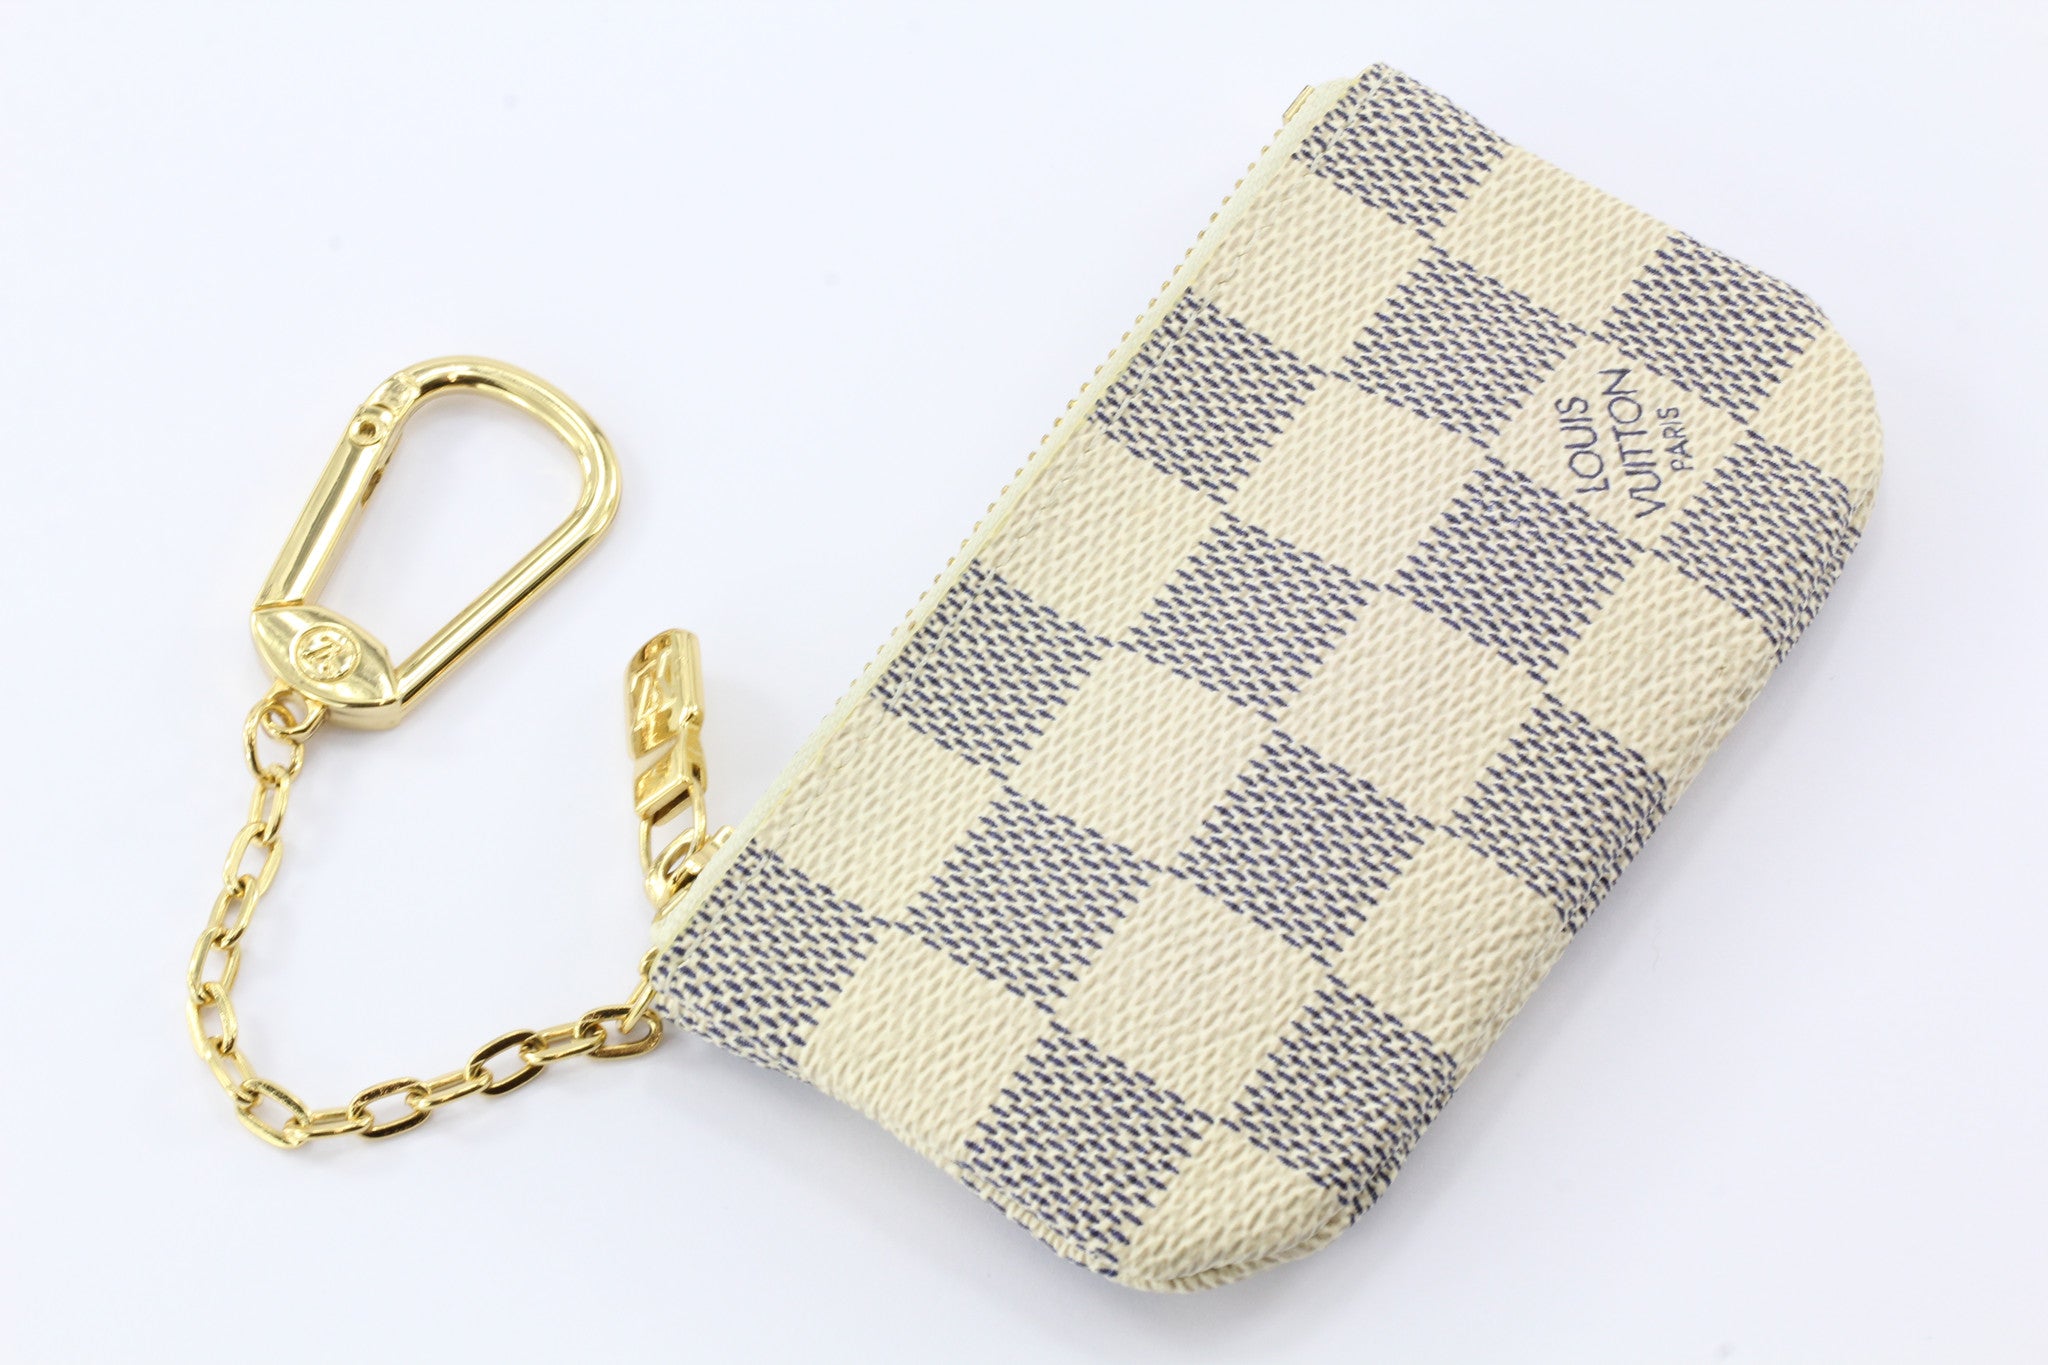 Limited Edition Louis Vuitton Damier Azur Complice Trunks and Bags Key Pouch